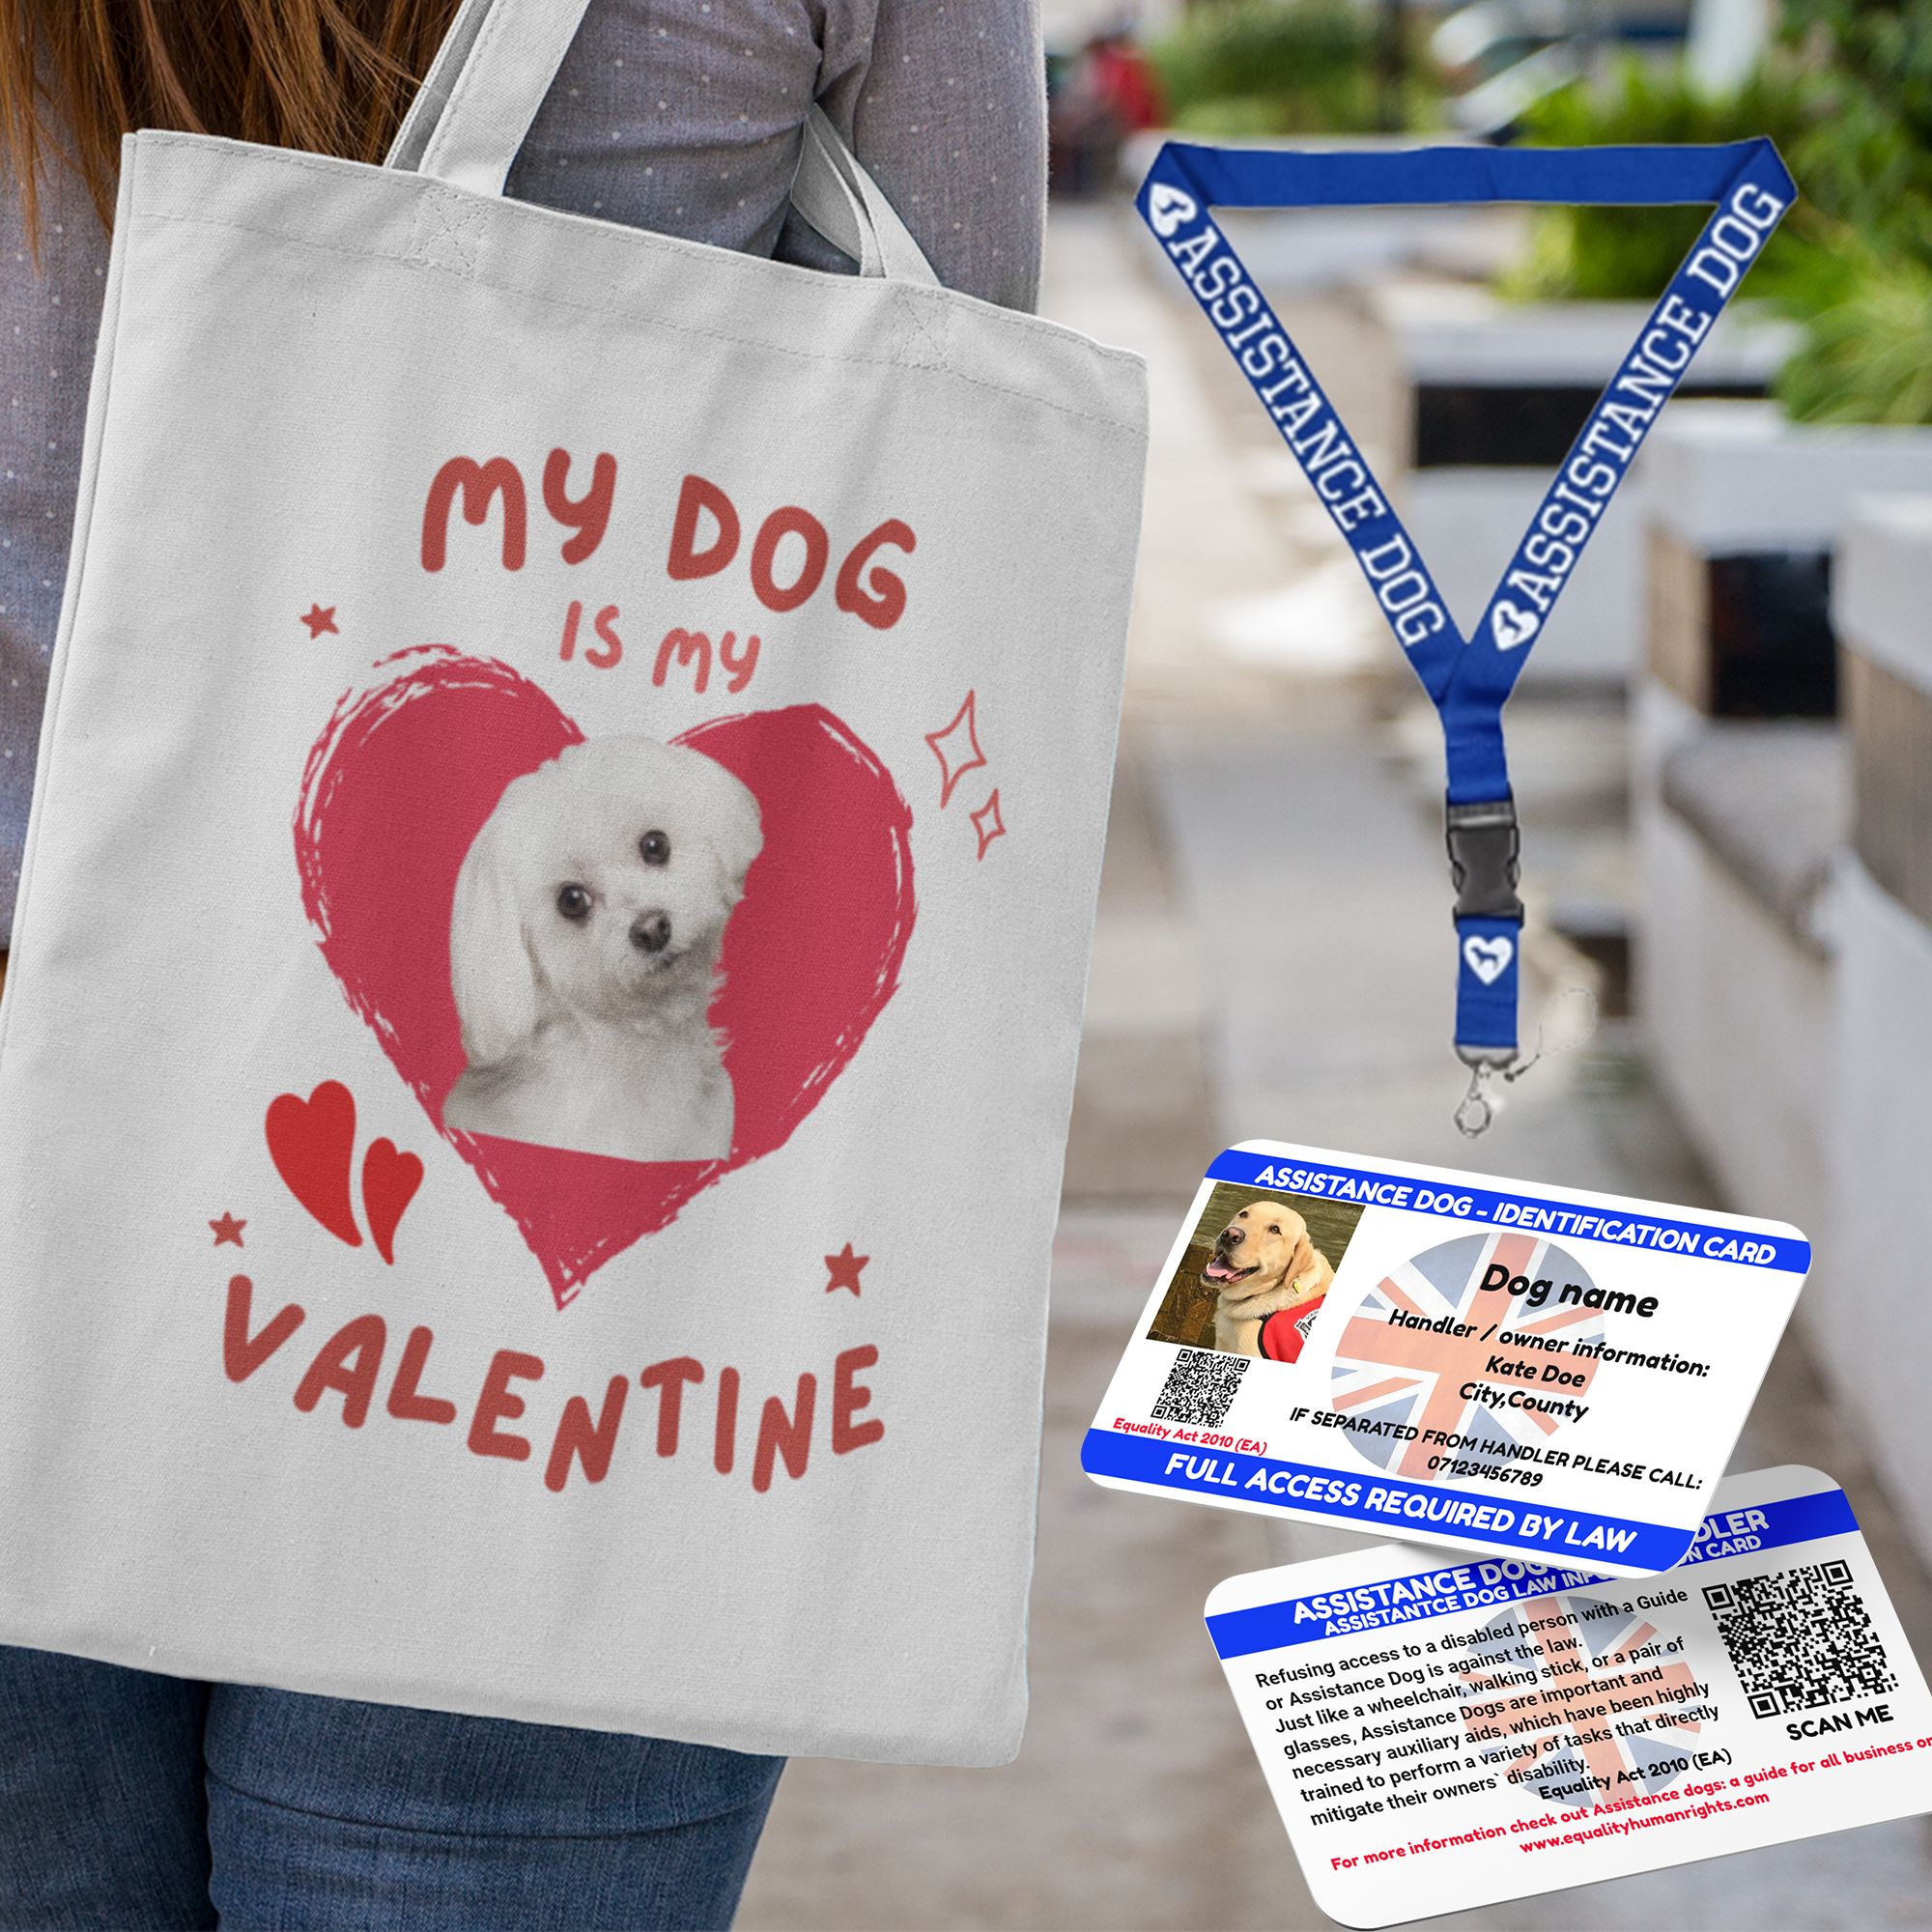 My Dog Is my Valentine Personalized Tote Bag ,Assistance Dog Law Card and Assistance Dog Lanyard